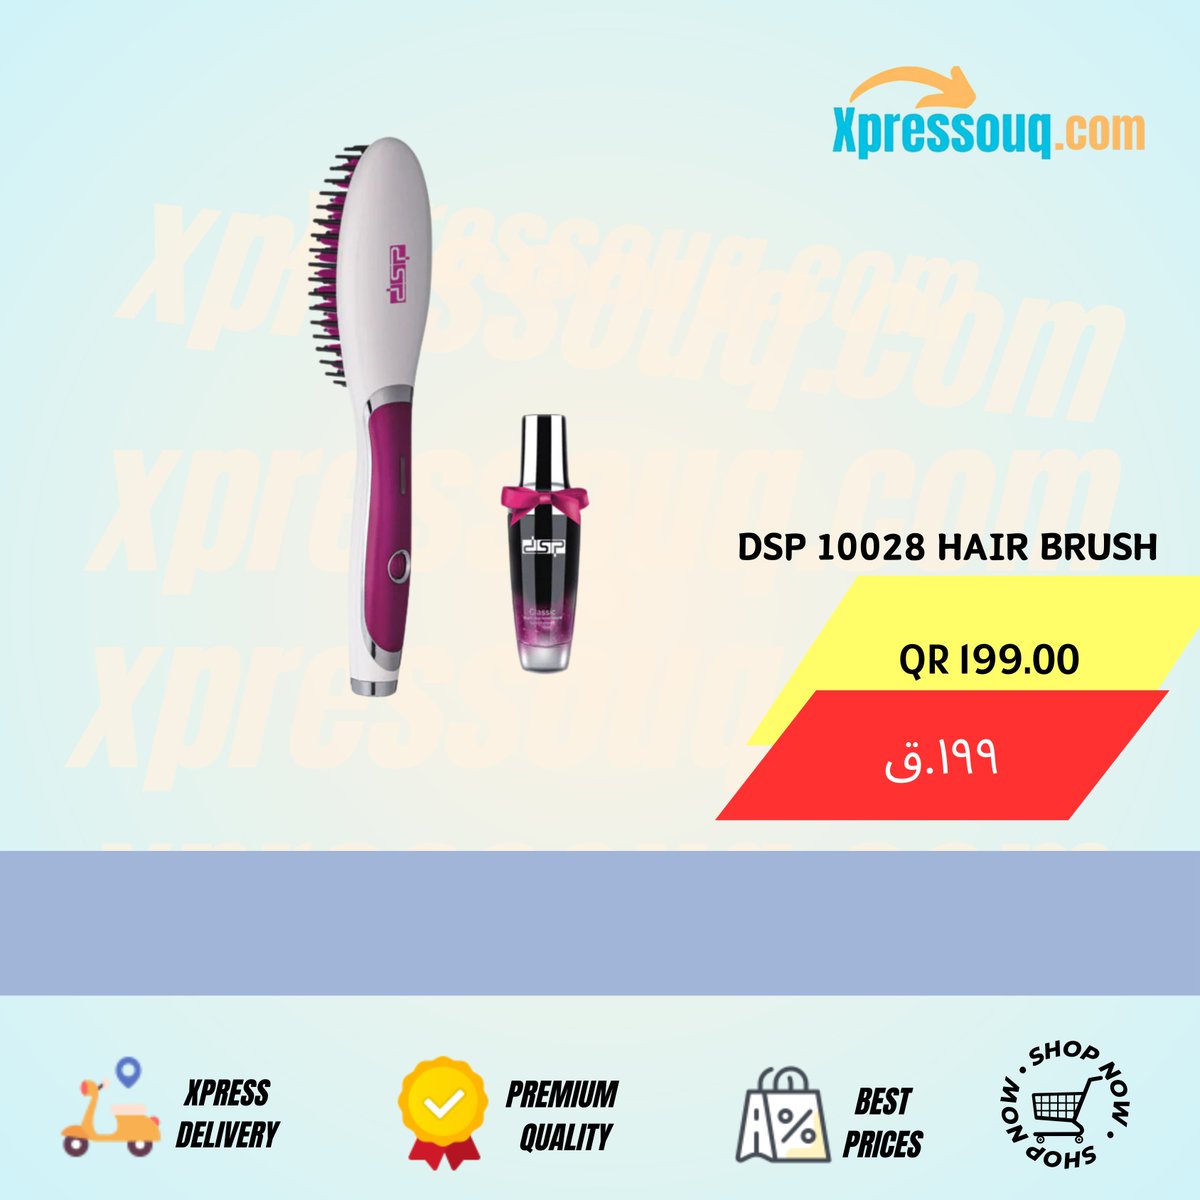 Smooth and Shine with DSP Hair Brush

🎯Order Now @ Just QR 199 only 🏃🏻‍
💸Cash on Delivery💸
🚗xpress Delivery🛻

xpressouq.com/products/dsp-1…

#DSPHairBrush #HairCareEssentials #HealthyHair #HairStyling #QatarBeauty #Hairbrushing #HairCareRoutine #SalonQuality #EverydayBeauty